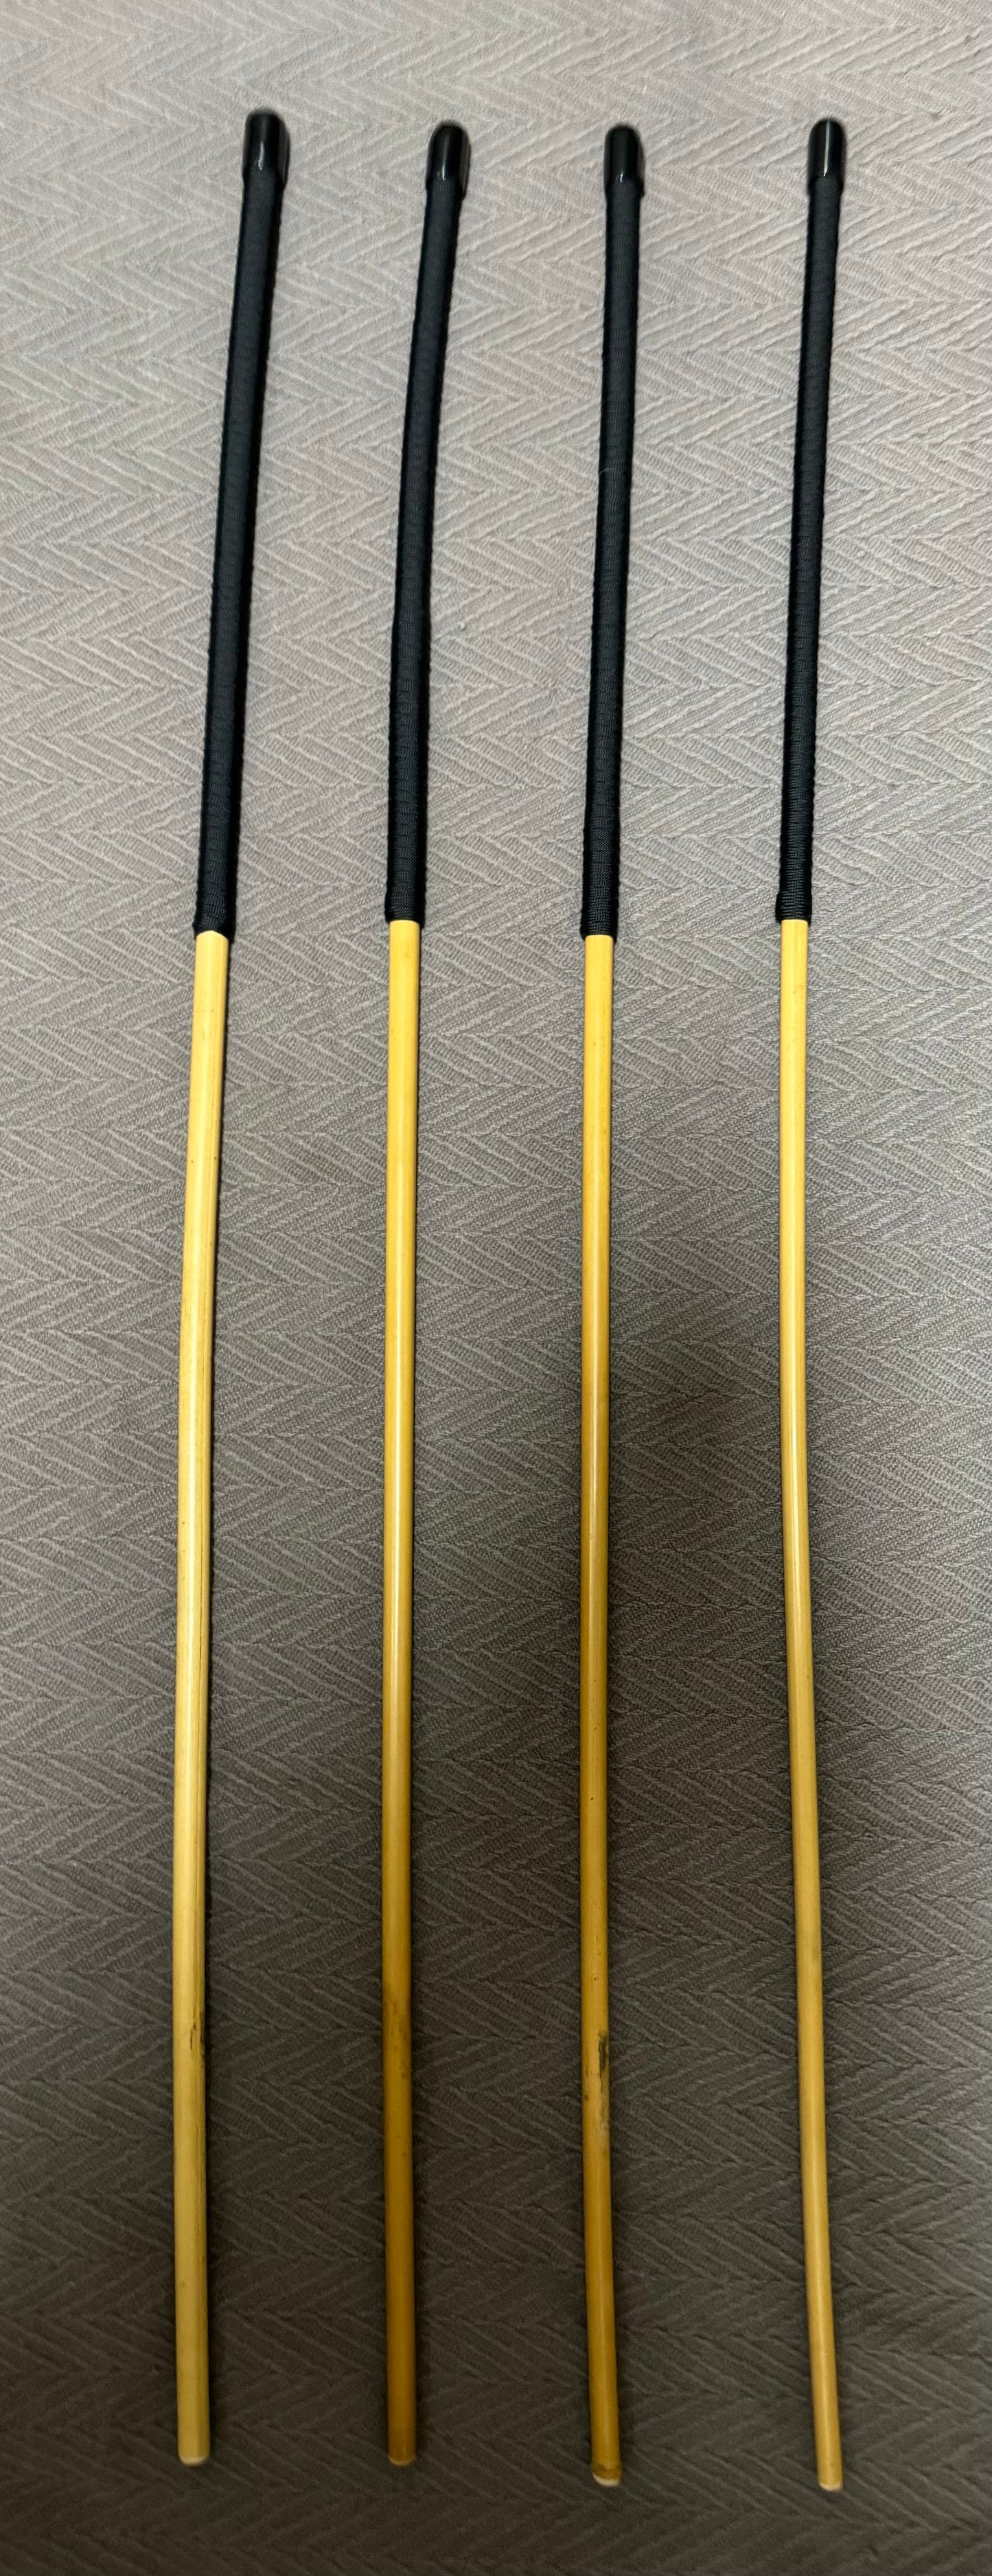 Set of 4 Knotless / No Knot Dragon Canes - 90 to 92 cms L & 10 - 13.5 mm D - BLACK Paracord Handles - Englishvice Canes